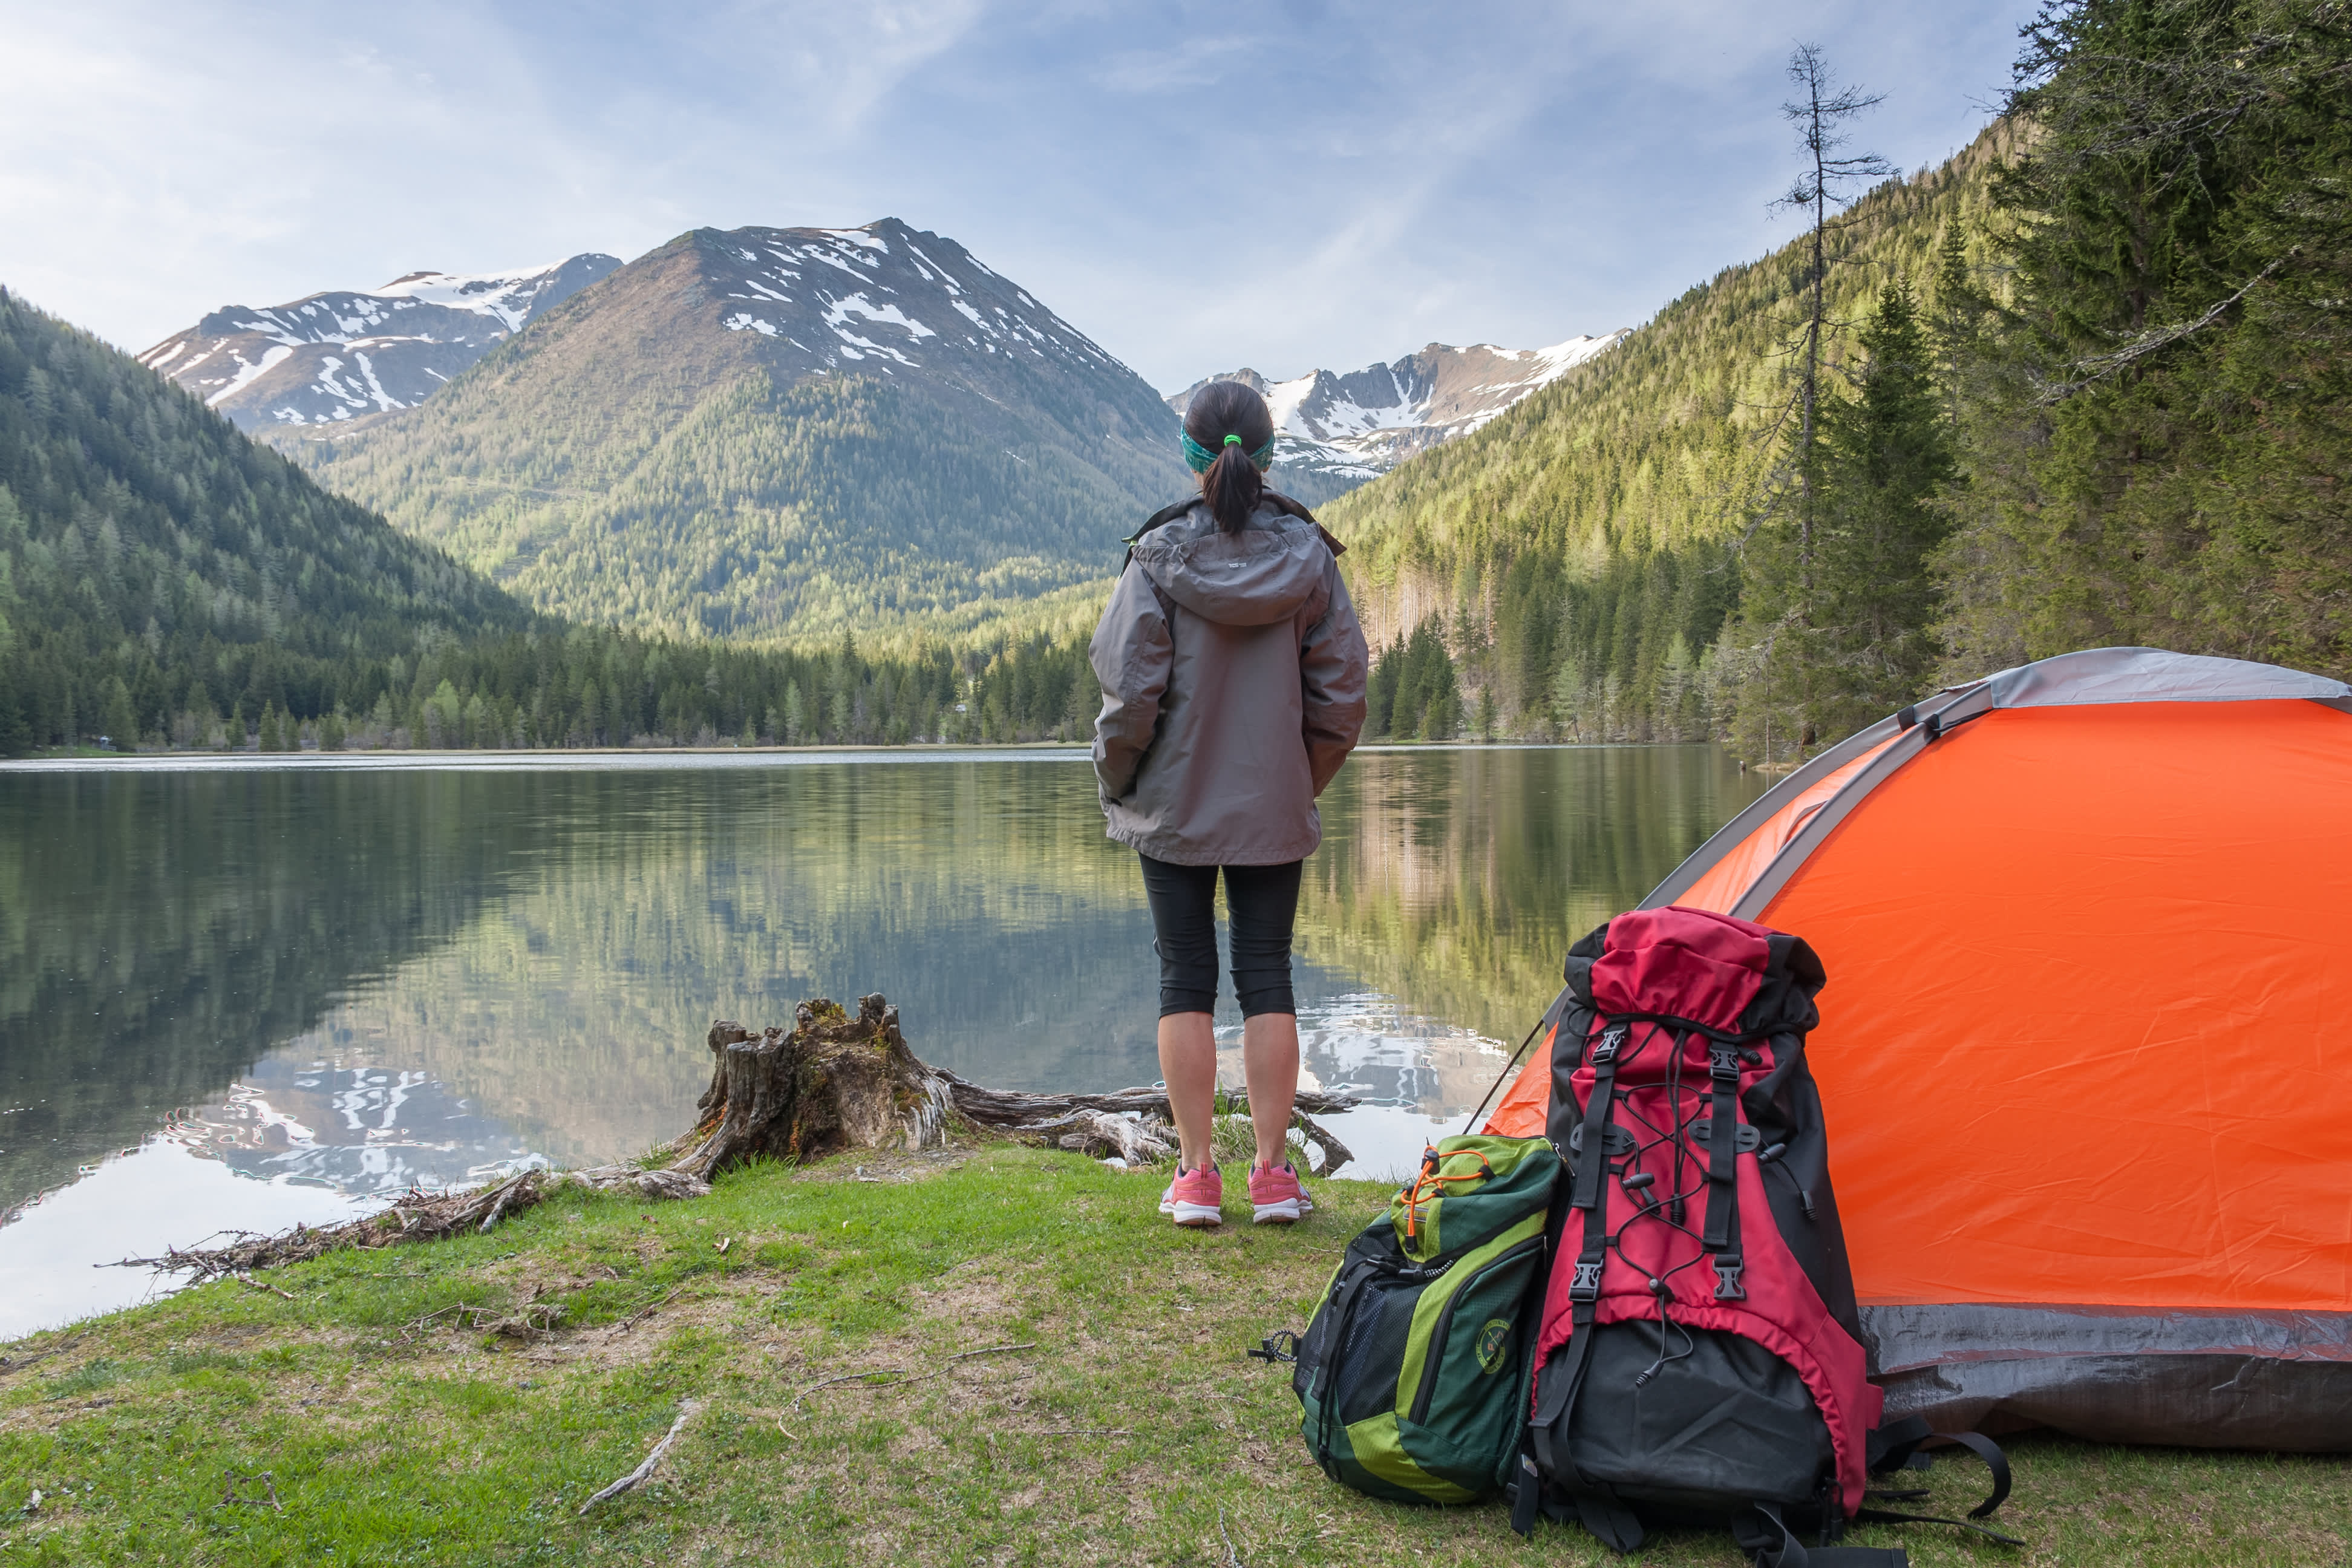 6 Sites Where You Can Buy and Sell Used Camping Gear | Apartment Therapy